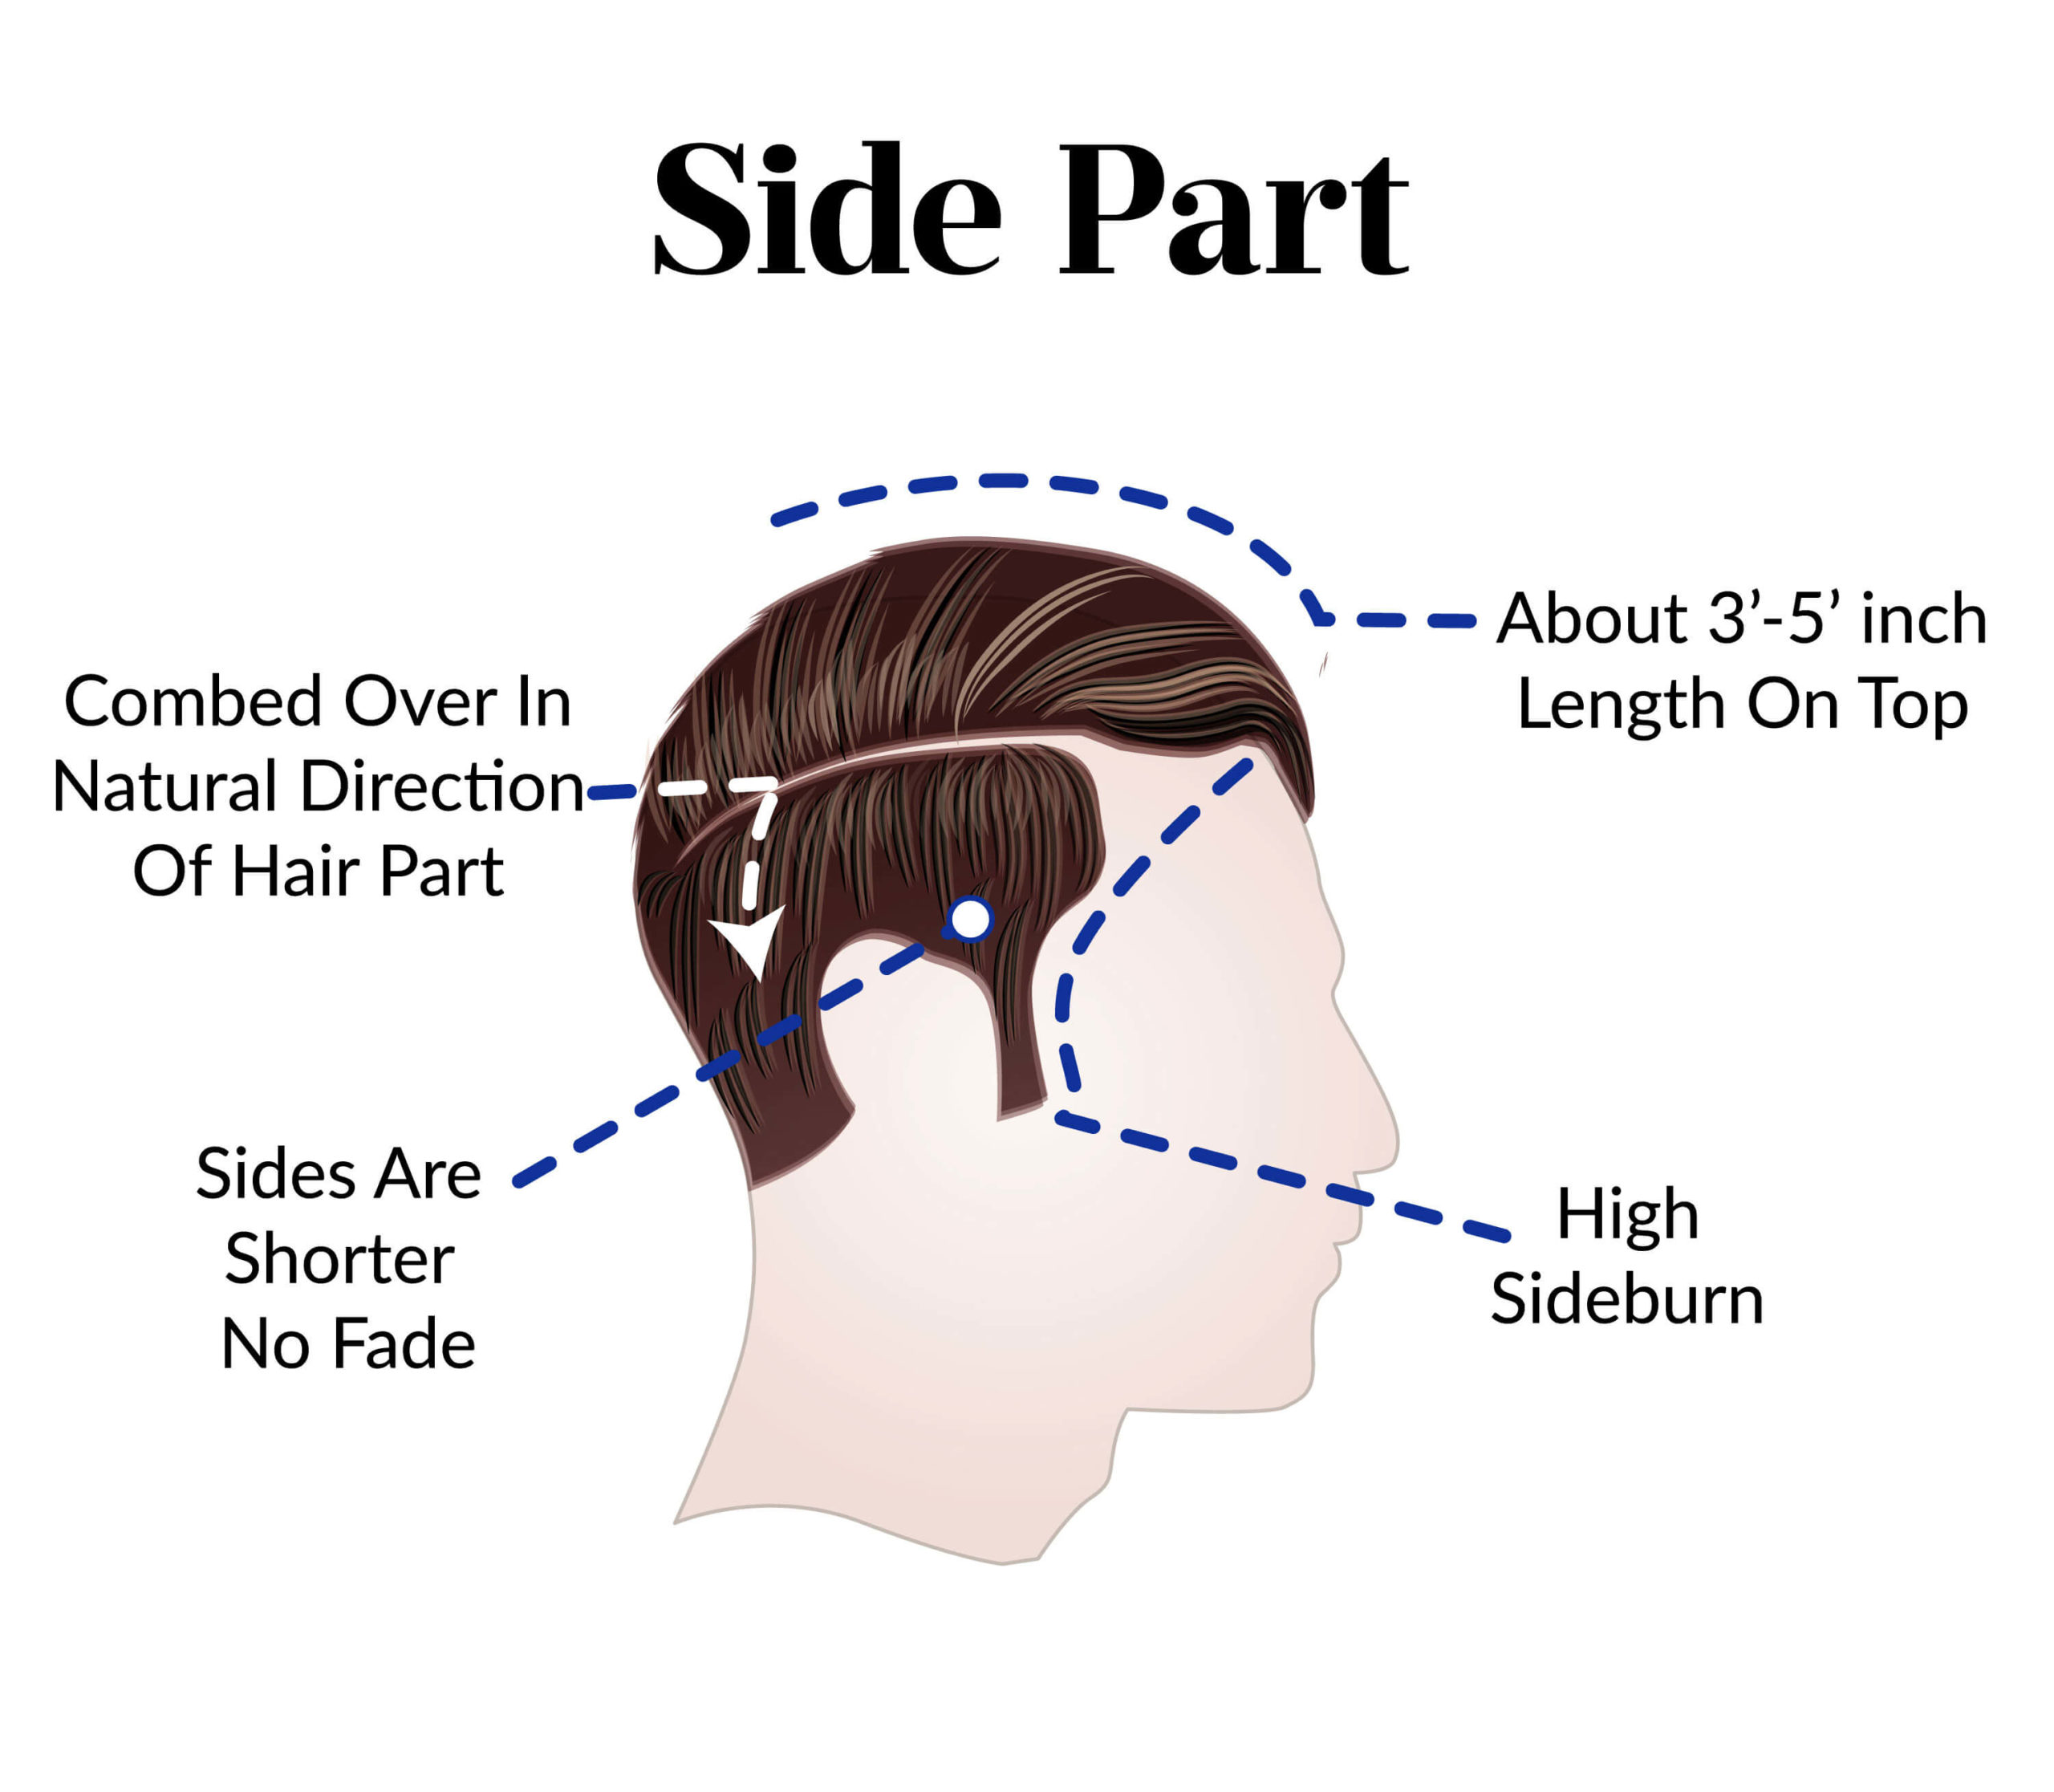 perfect men's hairstyle is the side part